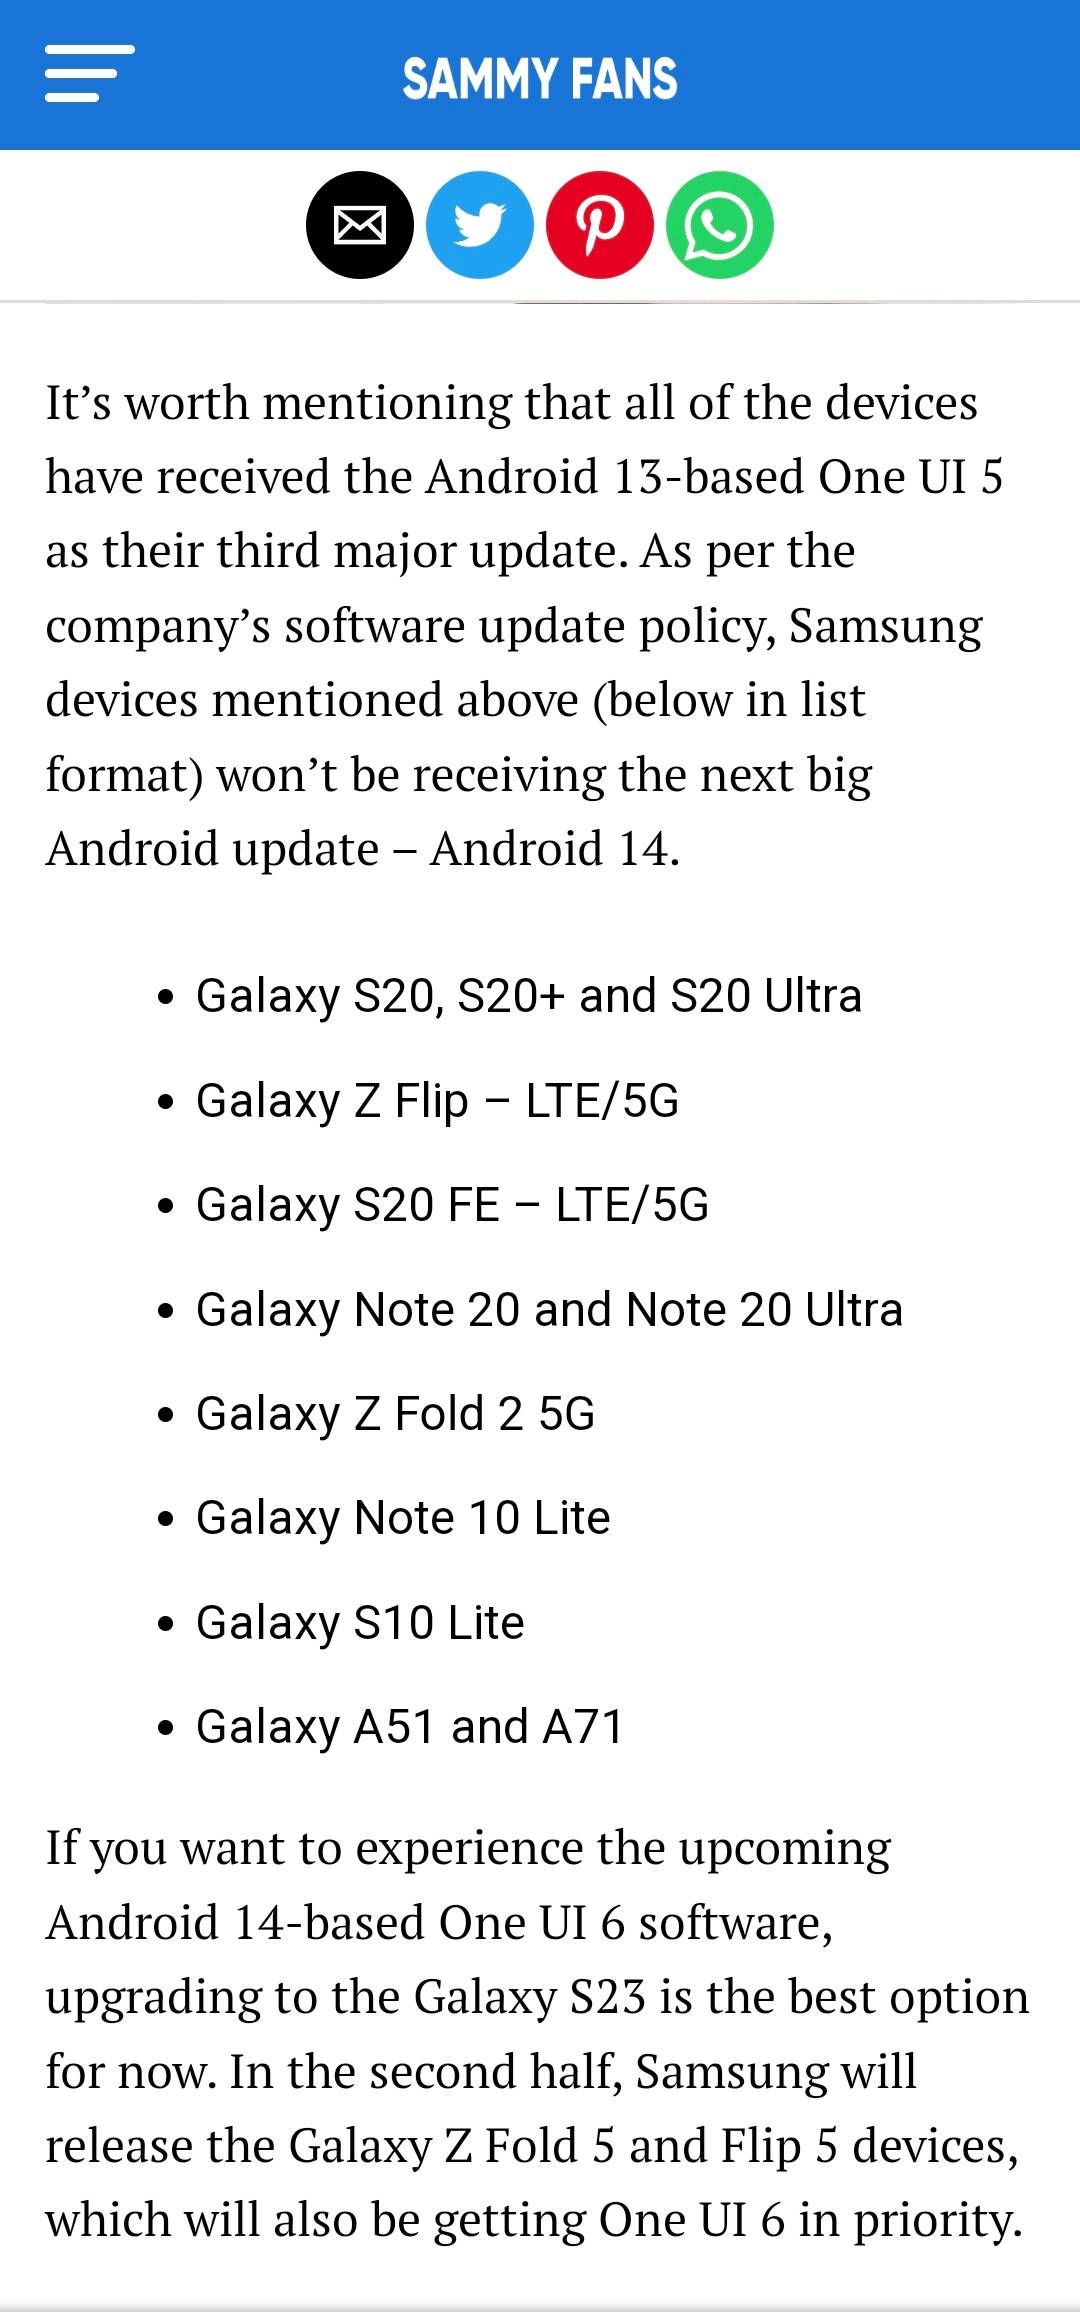 Will these smartphone models get android 14 ‽ - Samsung Members